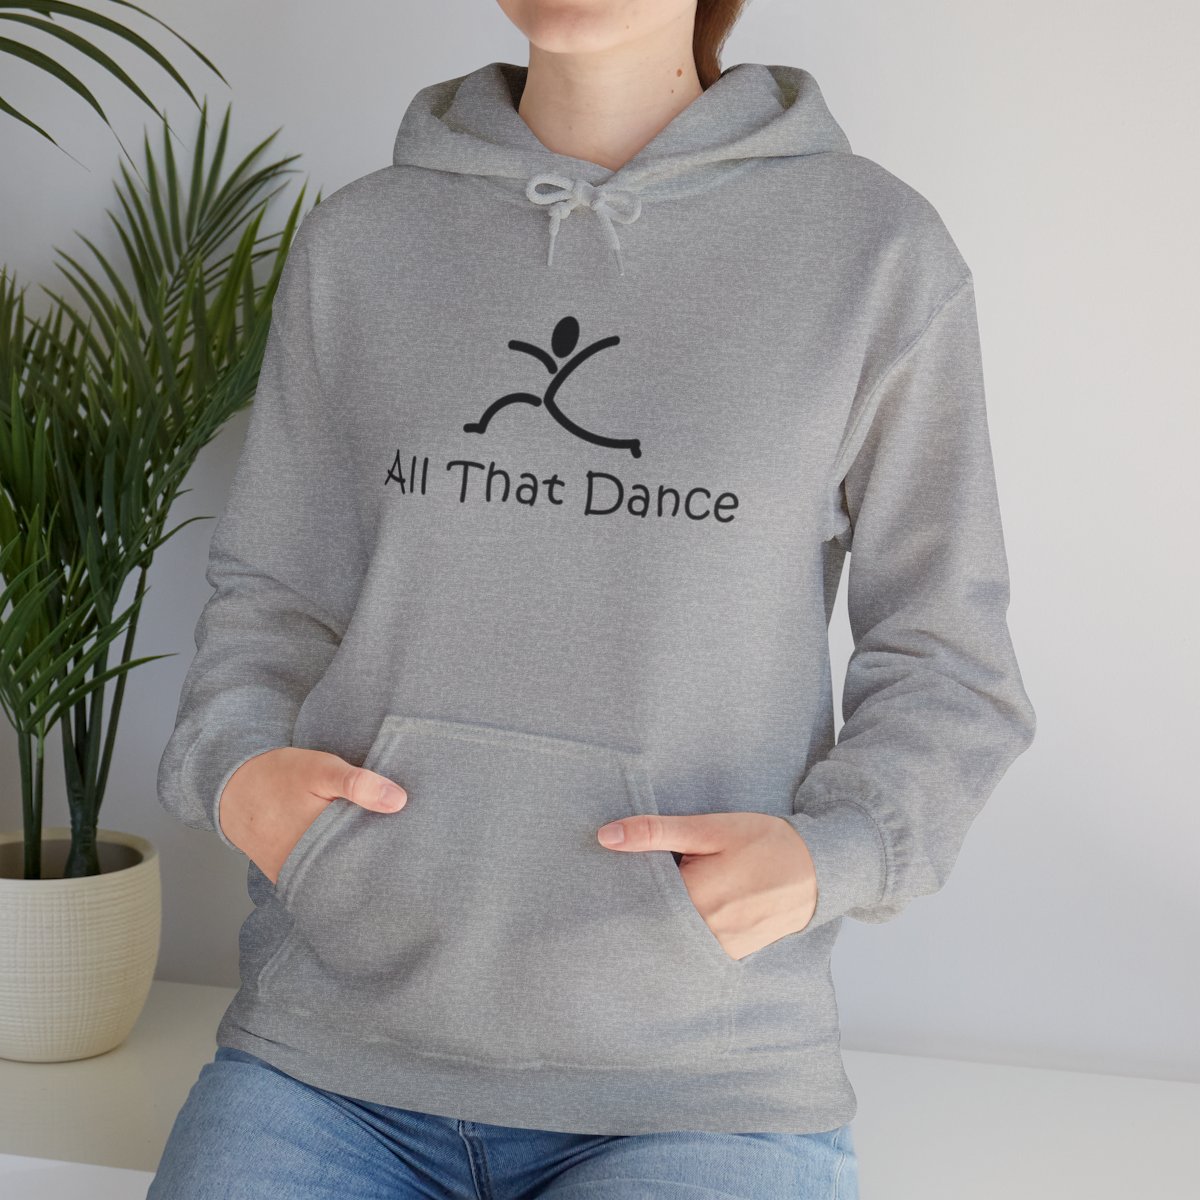 ADULT SIZES - All That Dance Hoodies product thumbnail image